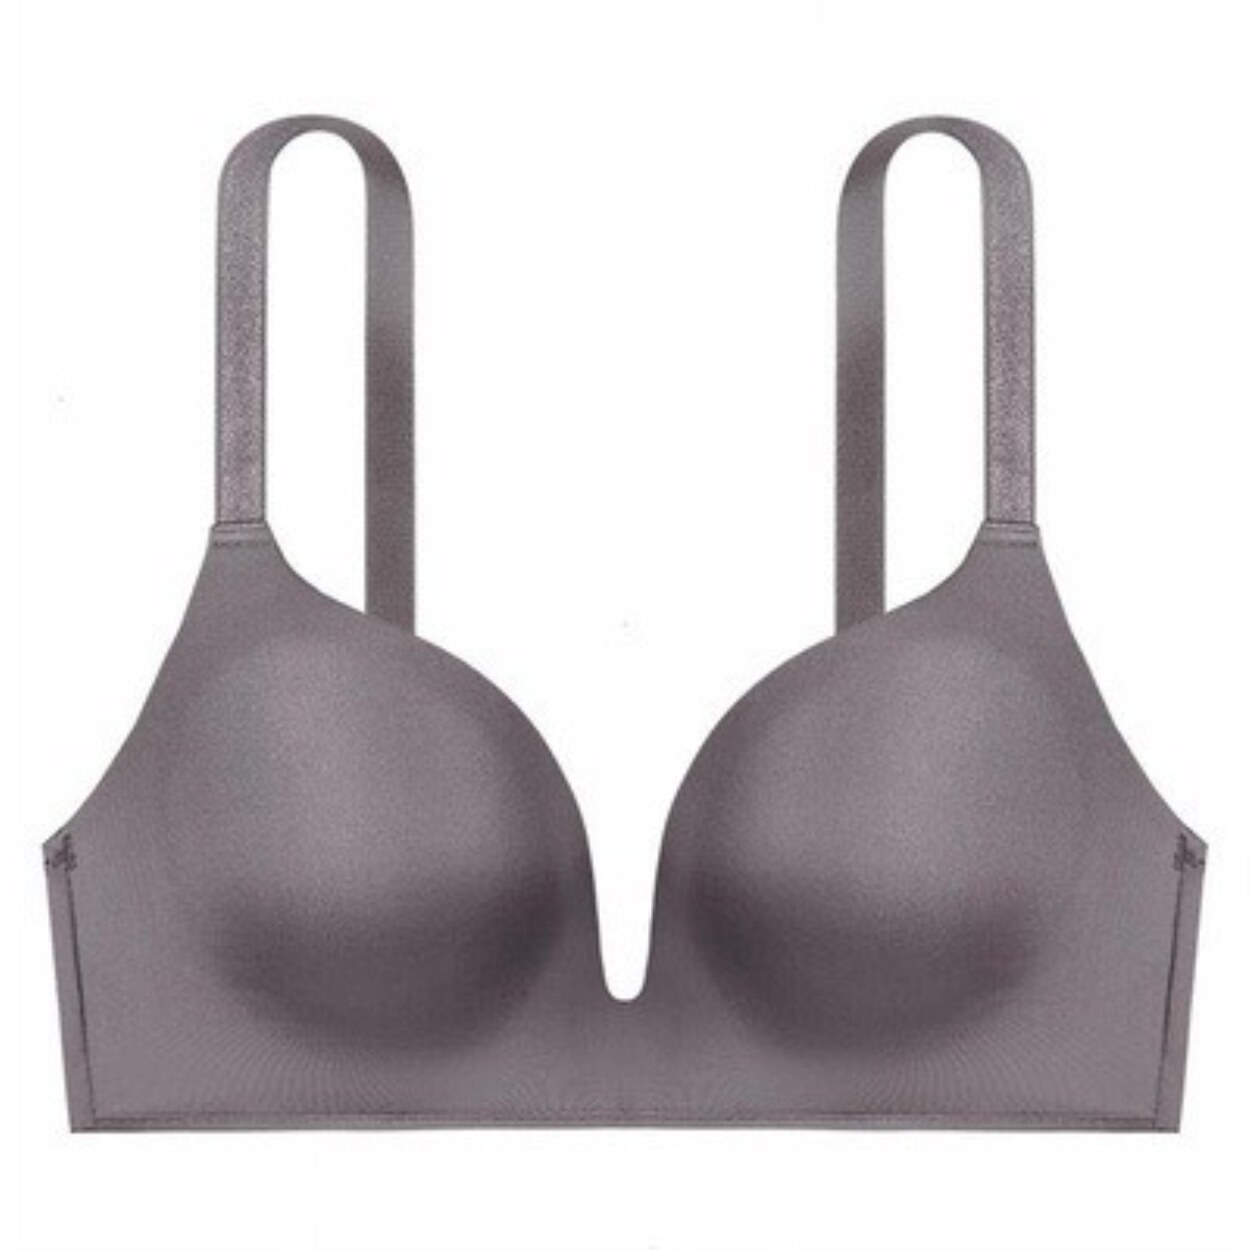 Summer Light and Small Chest Gathered Girl Comfort Simple Bra